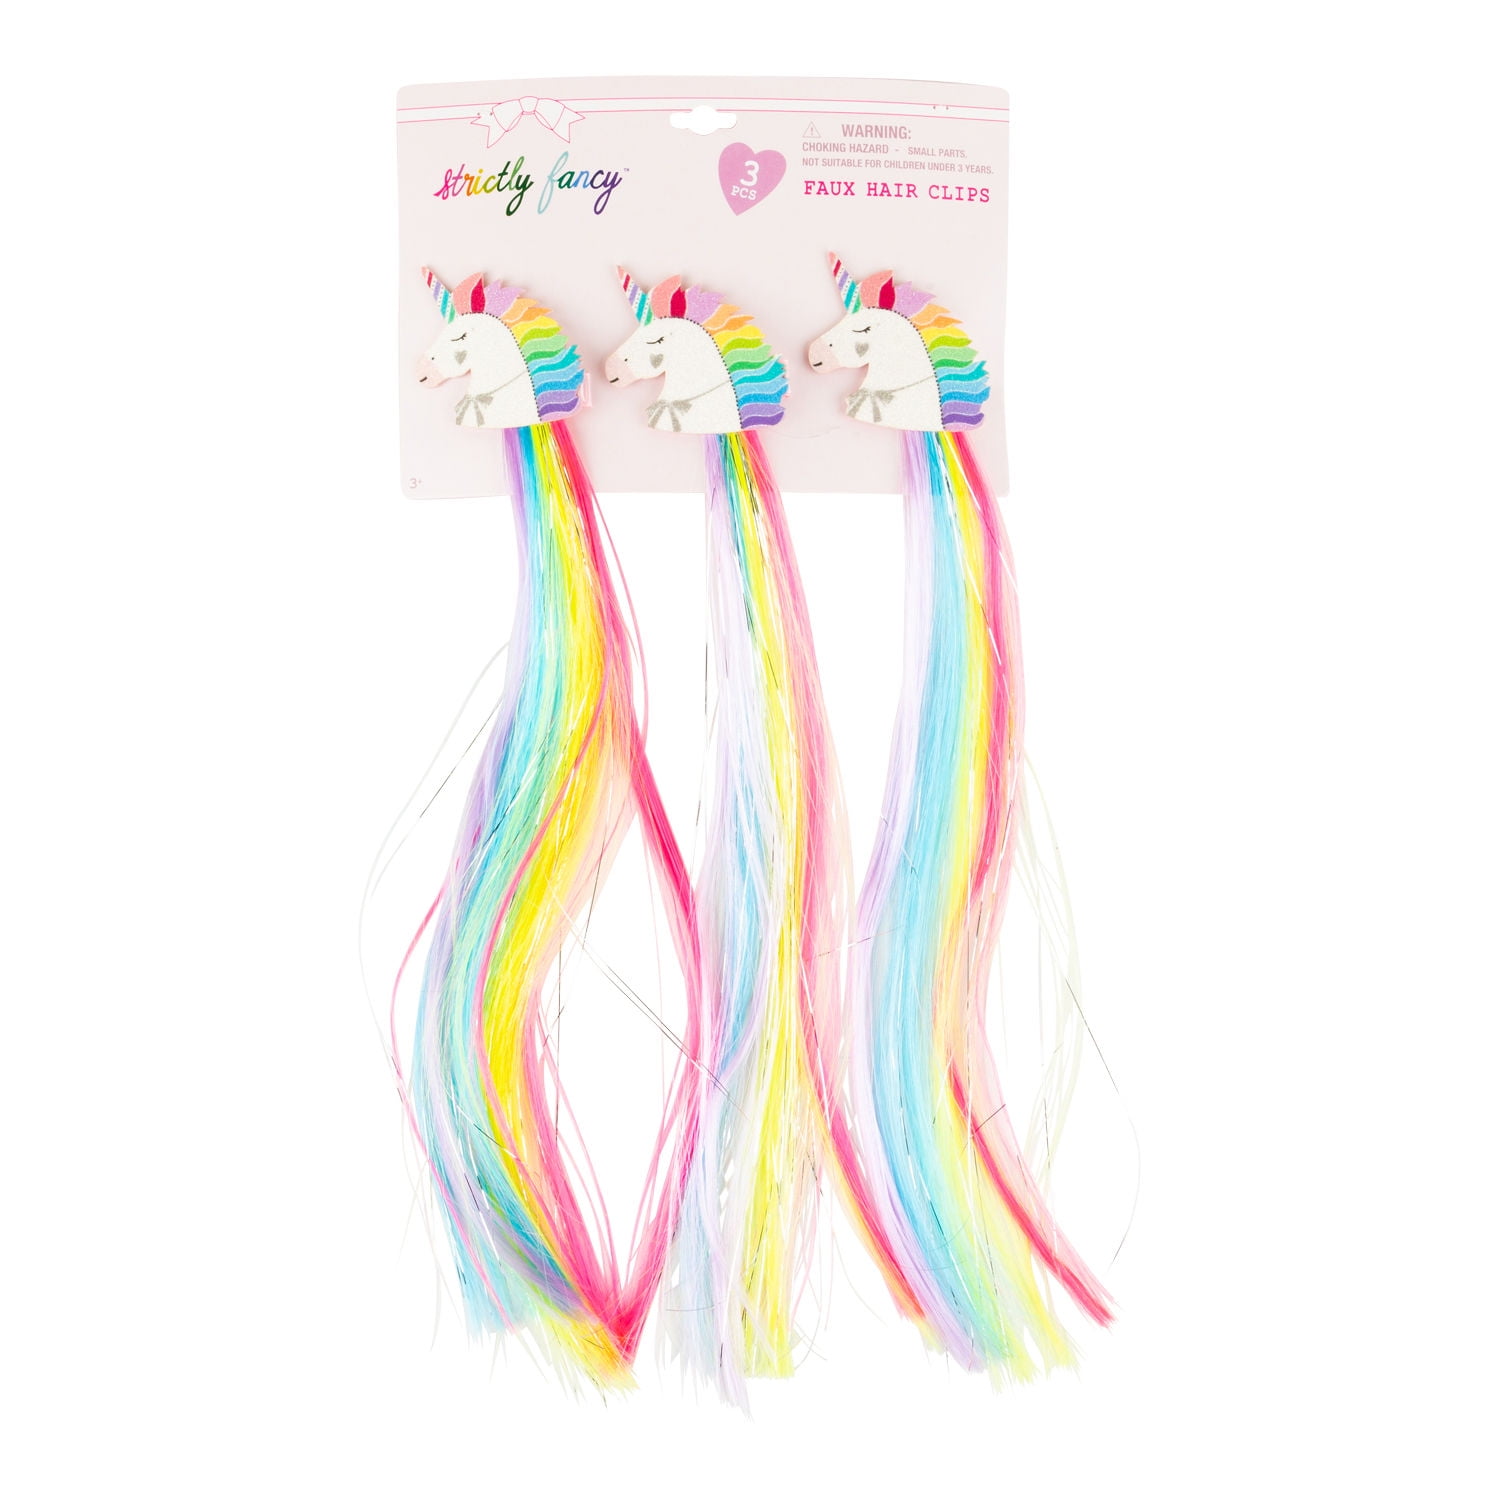 Strictly Fancy 3 Pack Faux Hair Clips, Bright Multi Colors